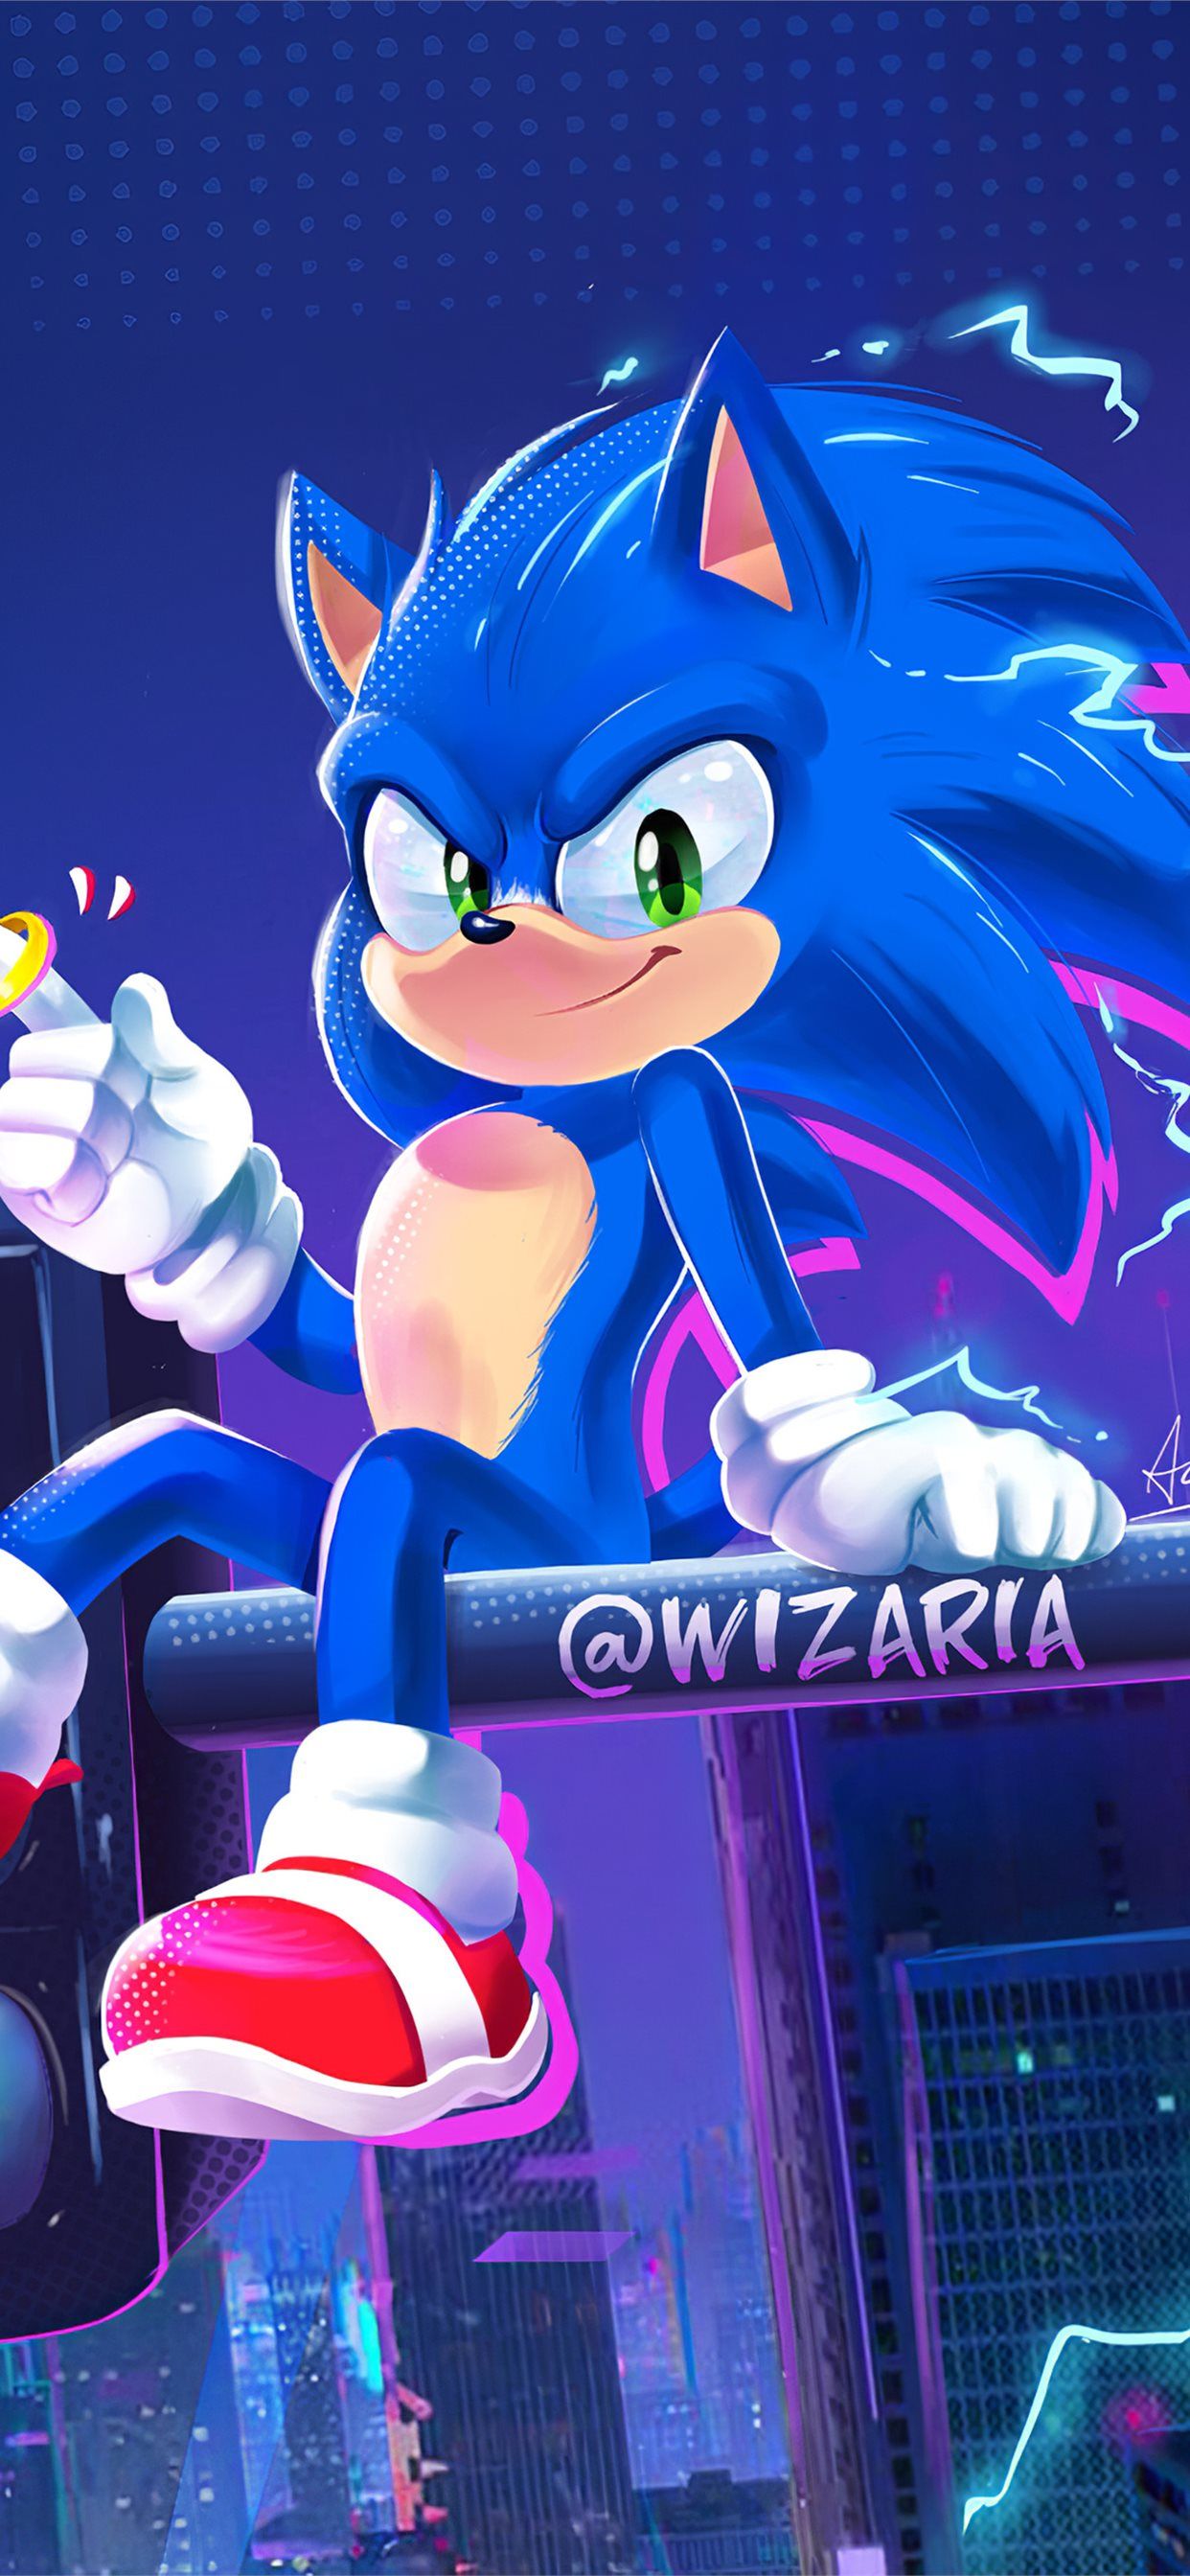 IPhone wallpaper of Sonic the Hedgehog holding a ring in front of a cityscape - Sonic